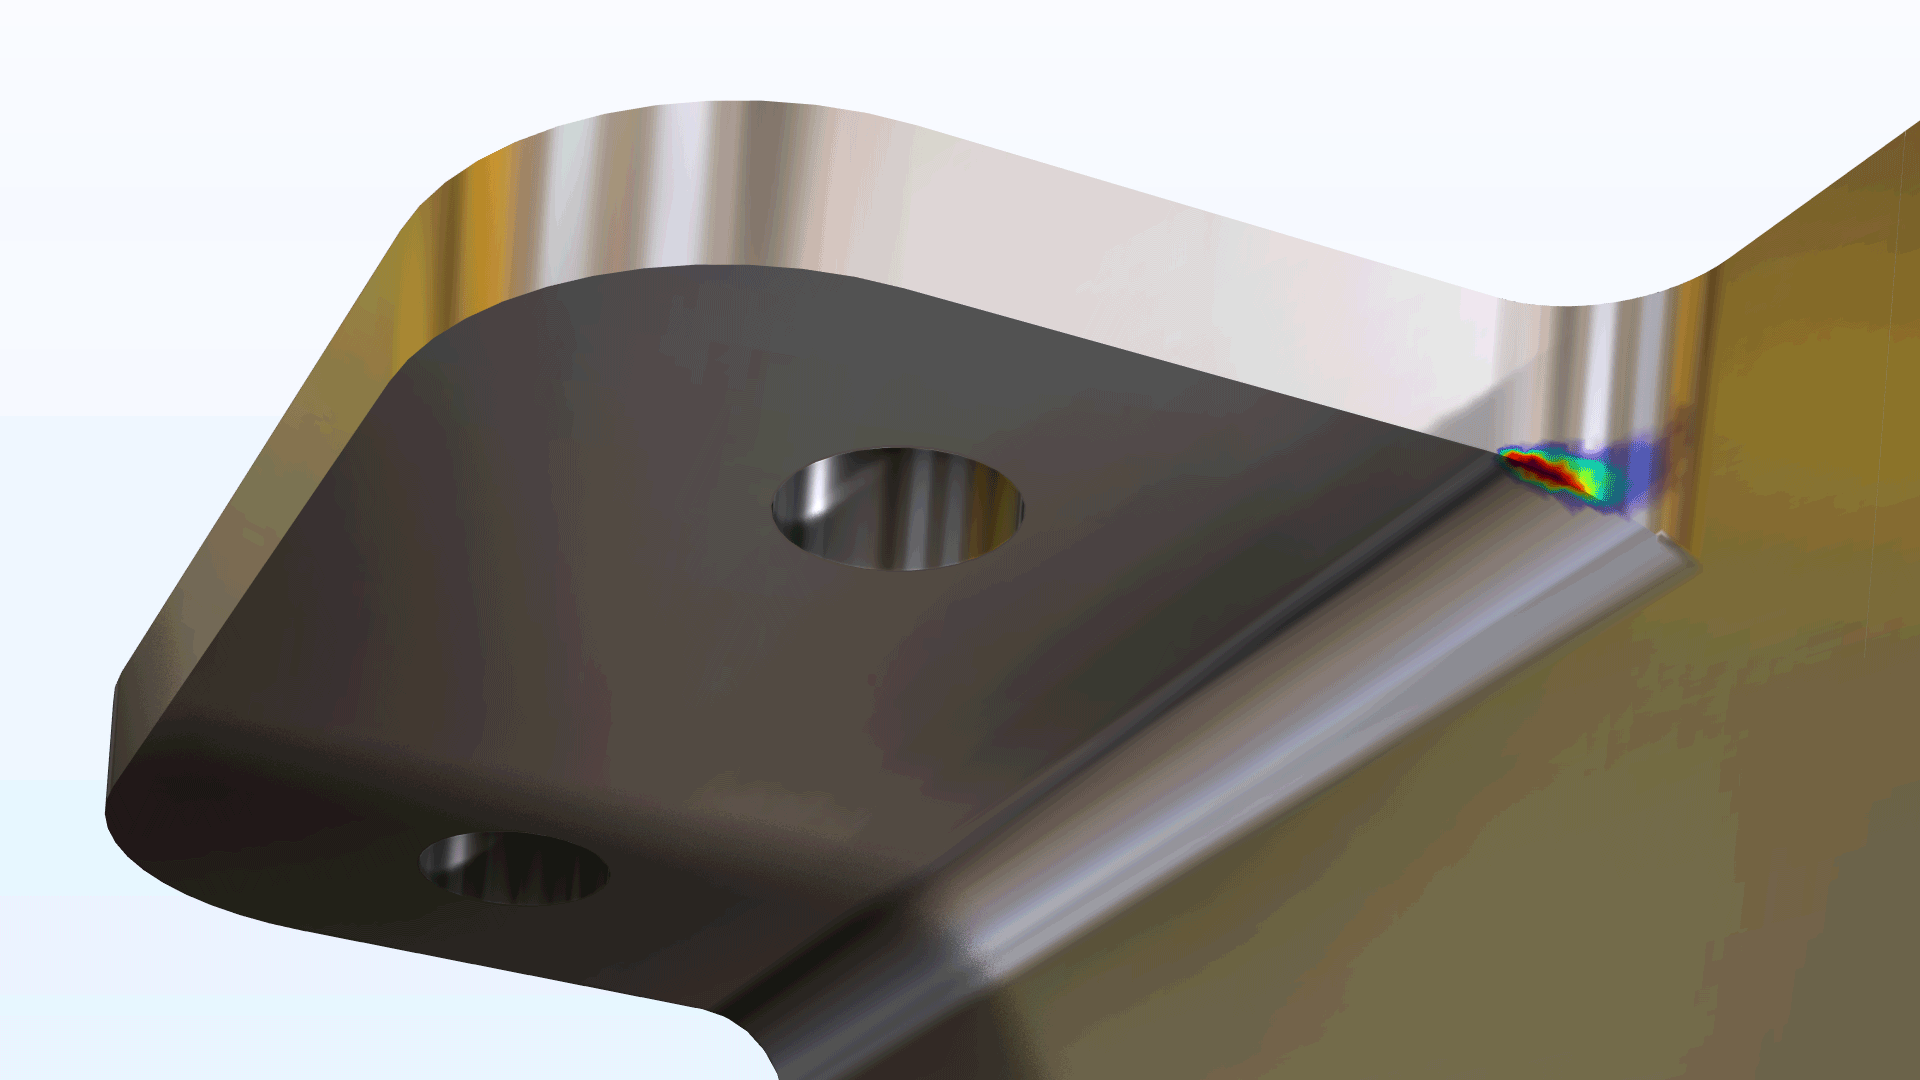 A close-up view of a bracket model showing the fatigue in the Prism color table.